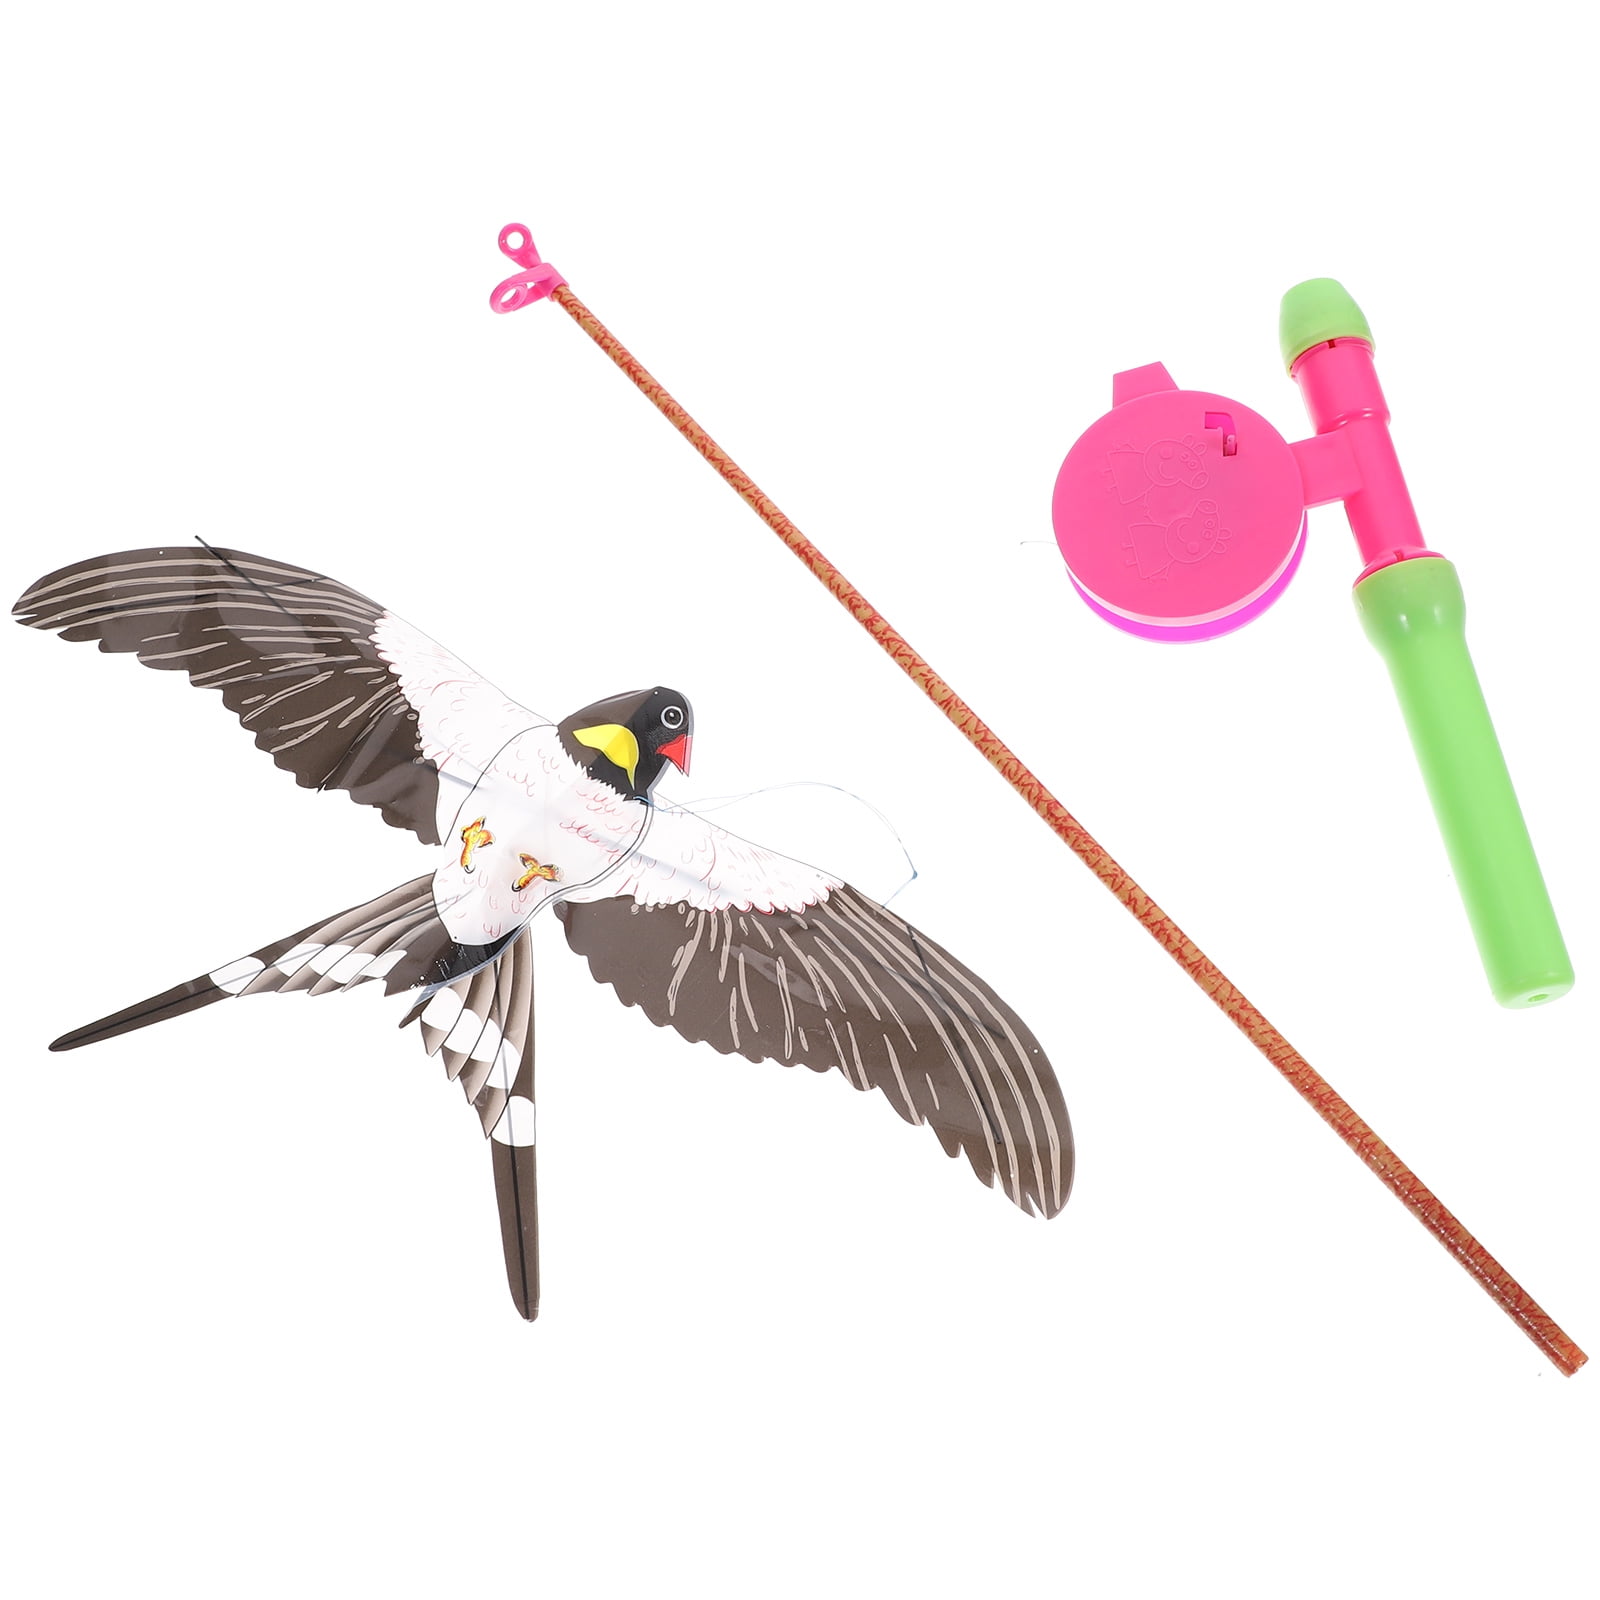 Swallow Bird Kite Easy to Fly Kite Outdoor Funny Kite for Kids with